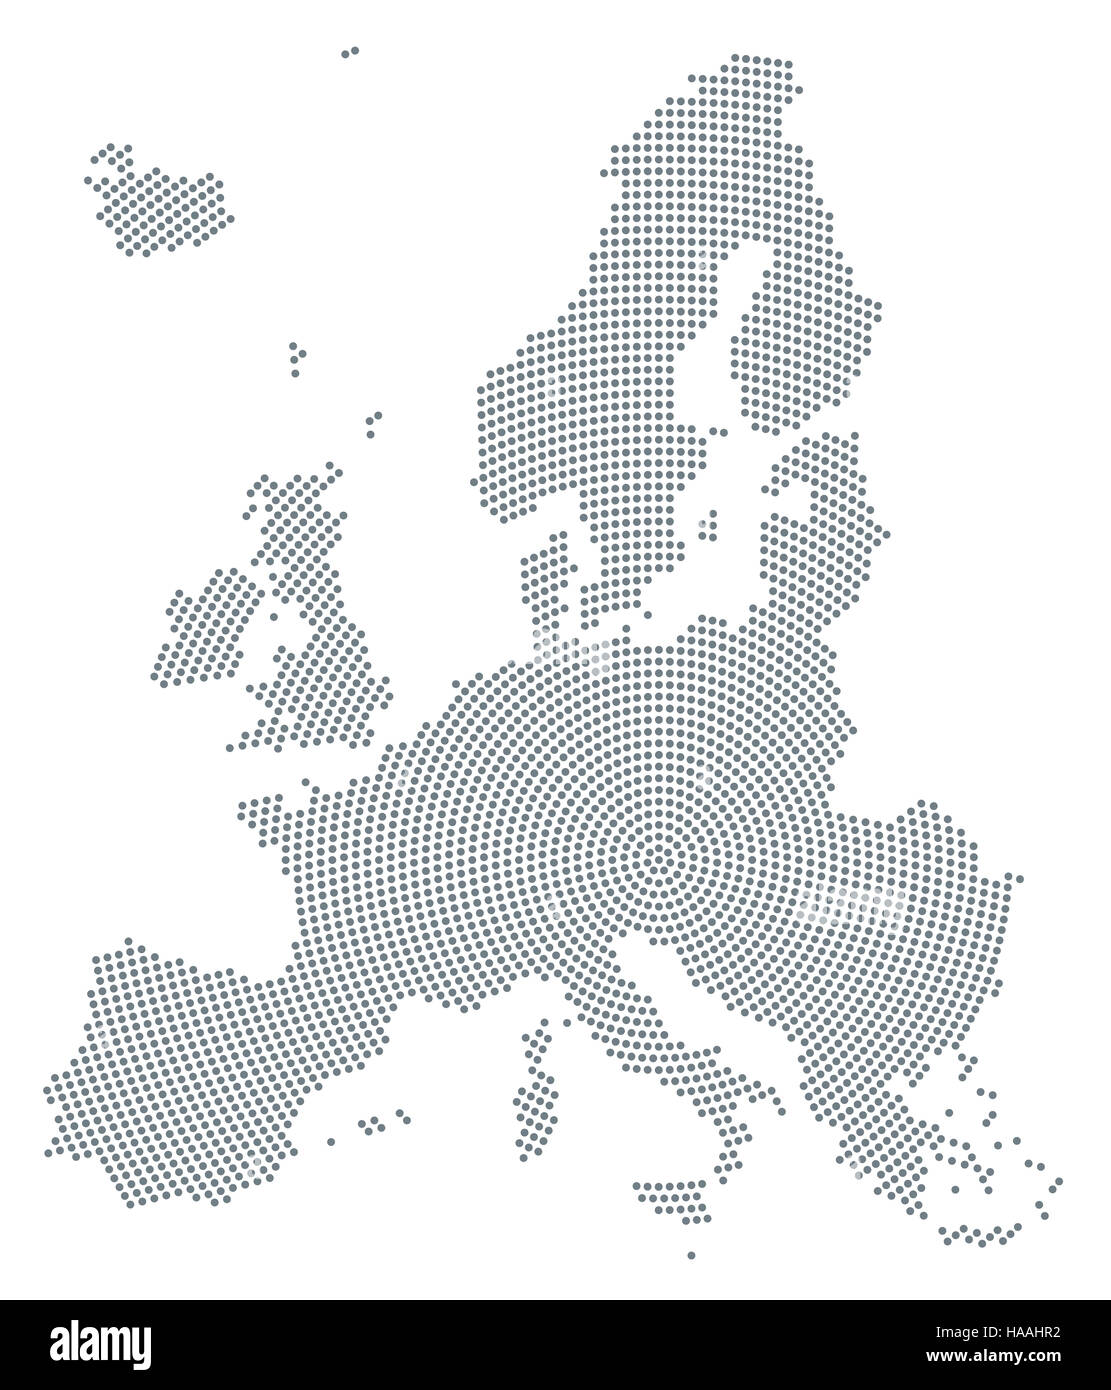 Europe map radial dot pattern. Gray dots going from the center outwards and form the silhouette of the European Union area. Stock Photo